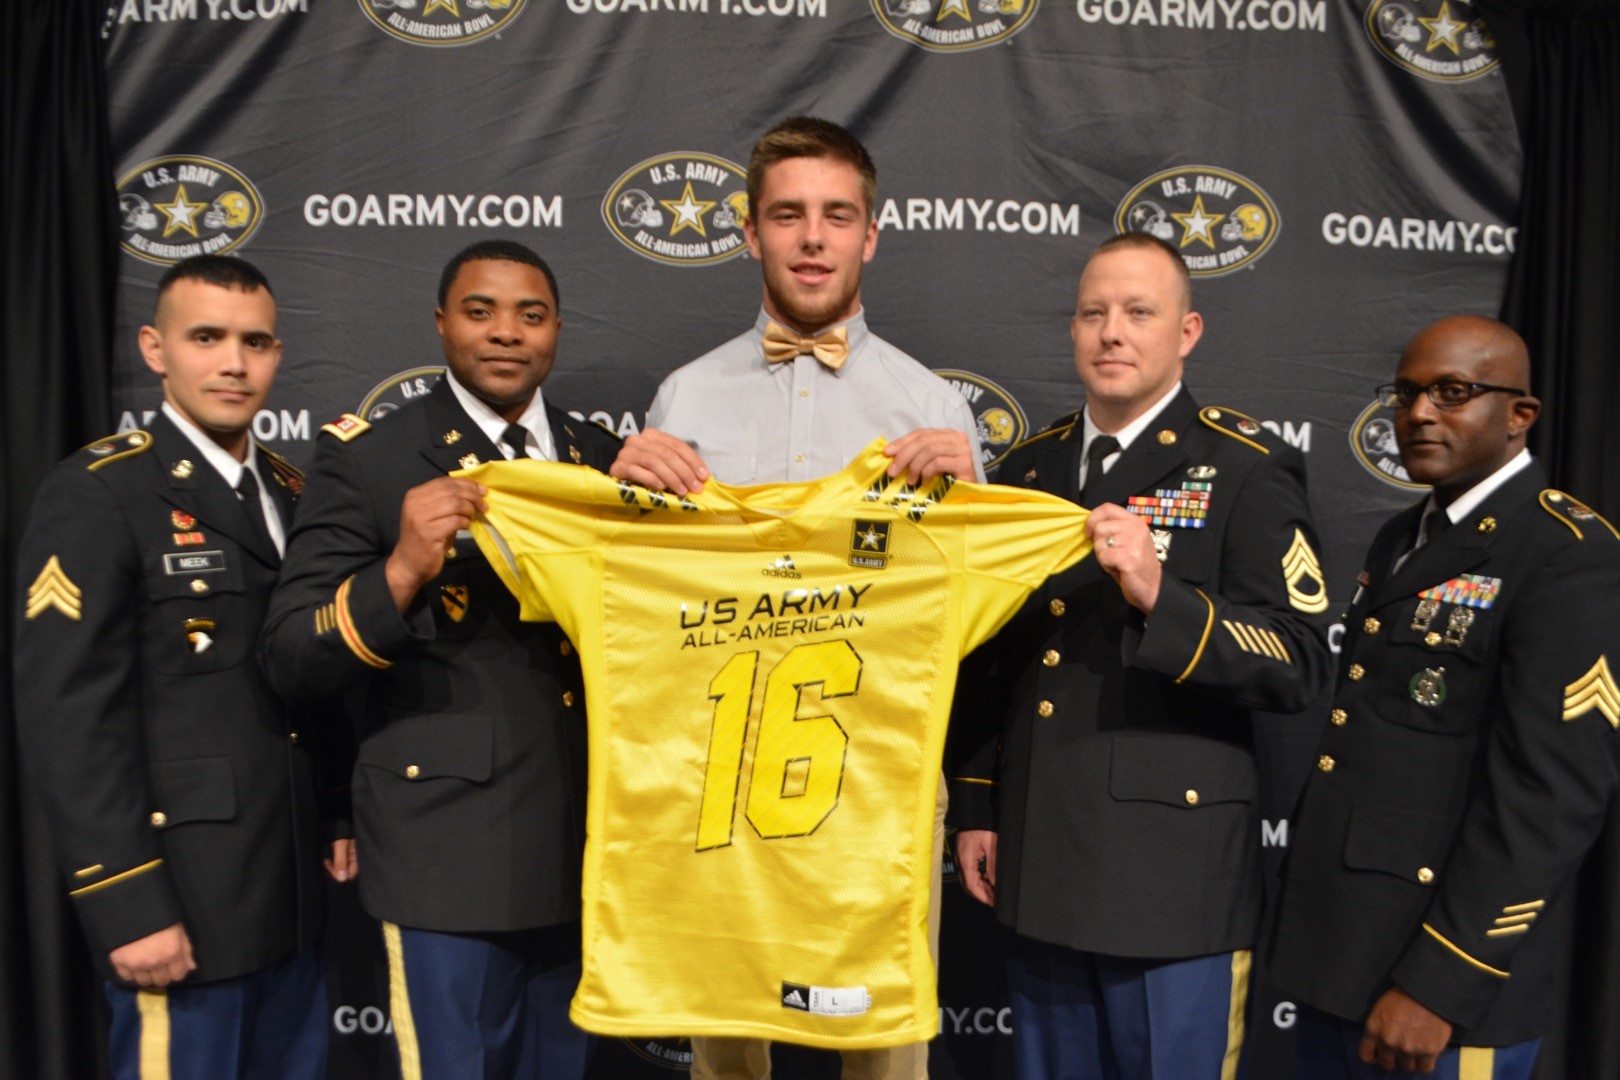 Carter Coughlin receives his jersey from Sergeant Joshua Meek, Captain Steven Cole, Sergeant First Class Robert Austin and Sergeant David Wilson. (Photo: Army All-American Bowl)